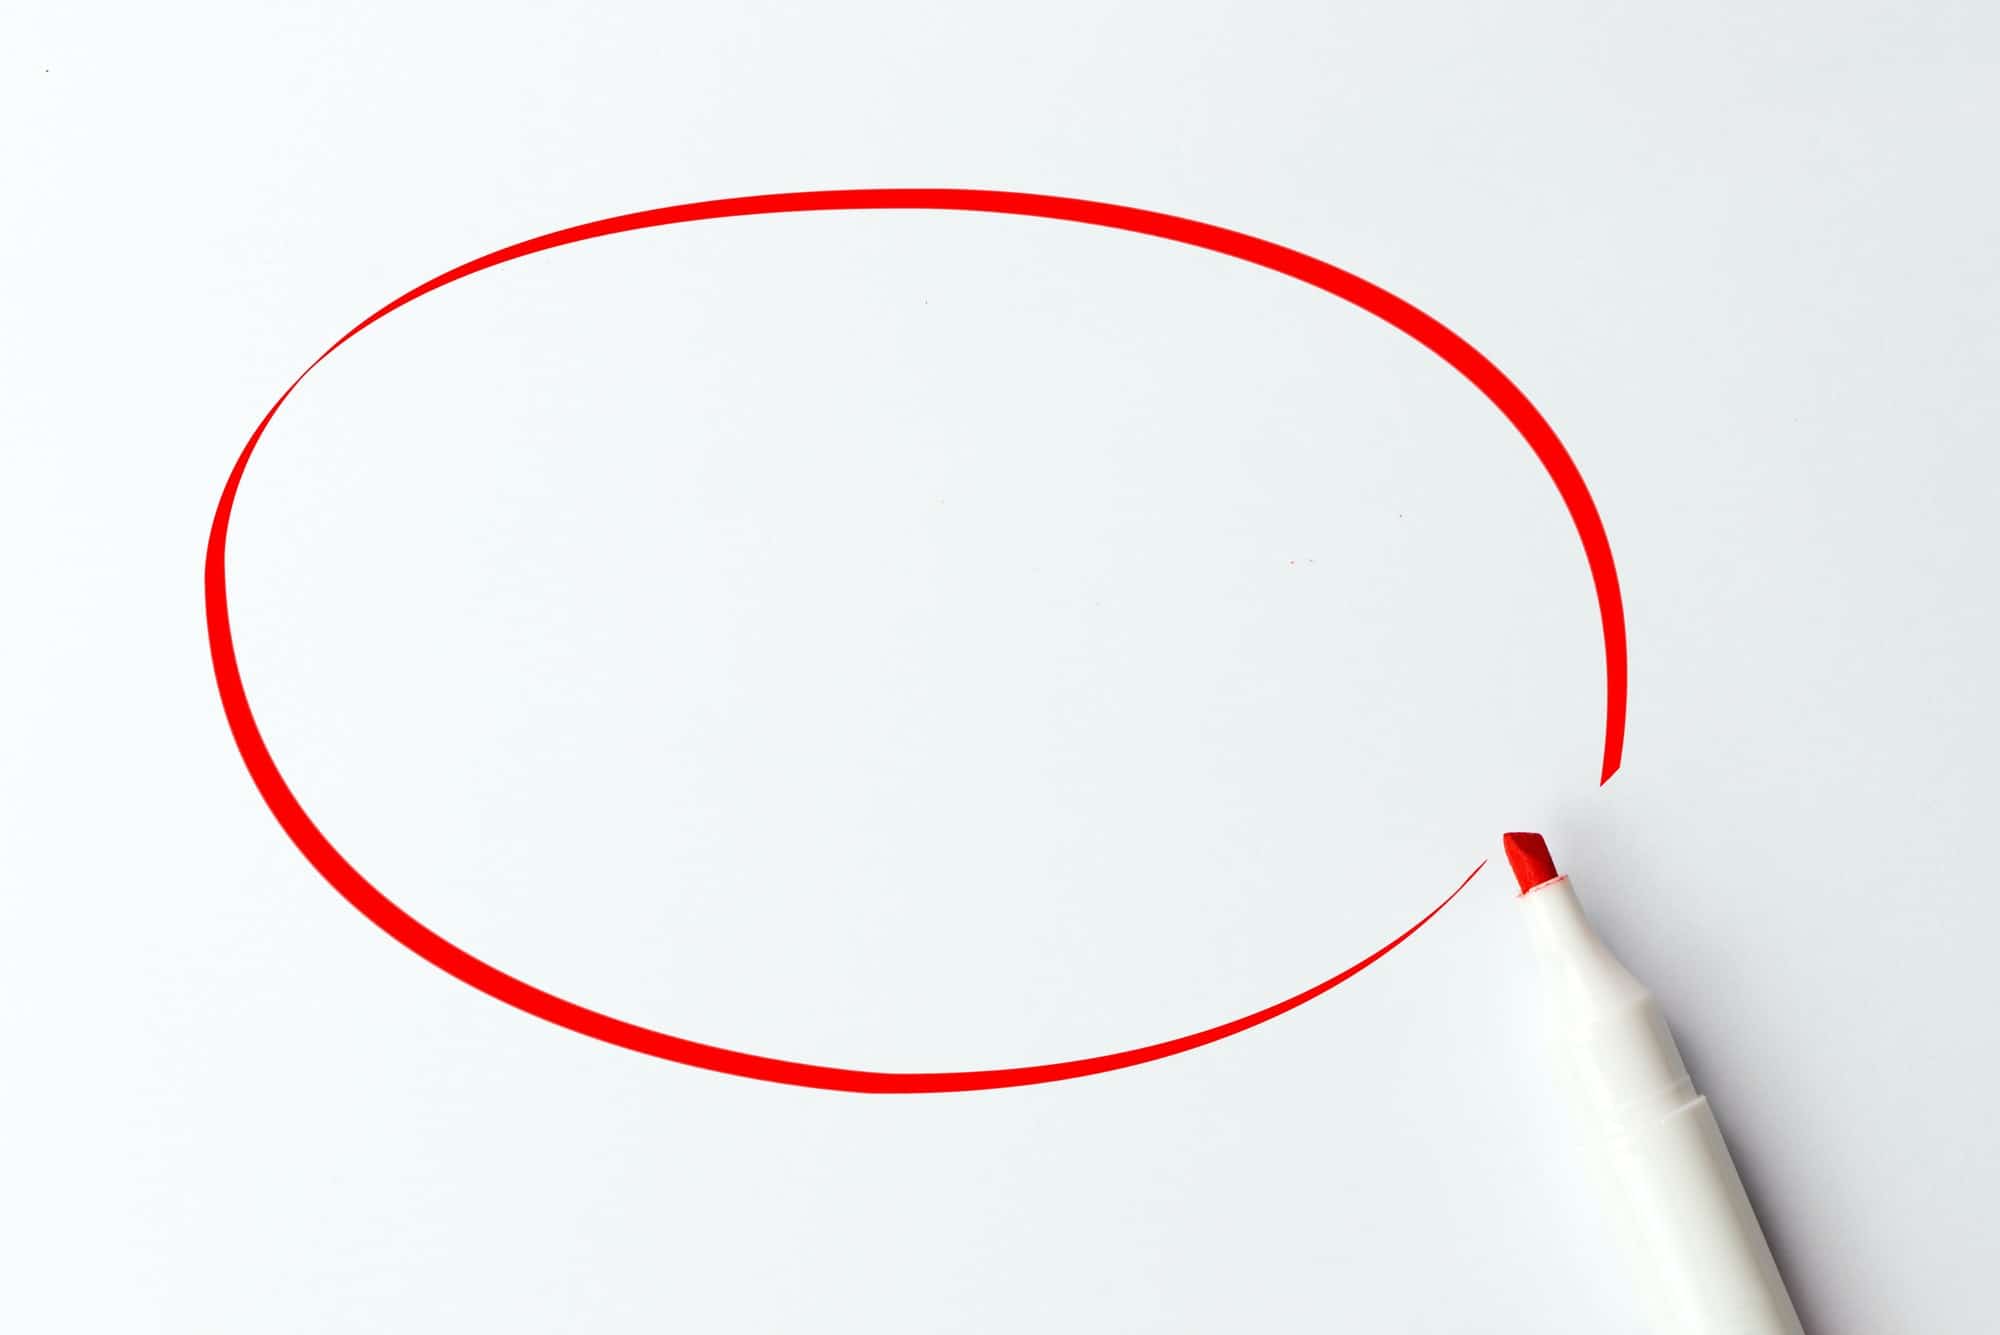 Red marker pen and blank drawing circle